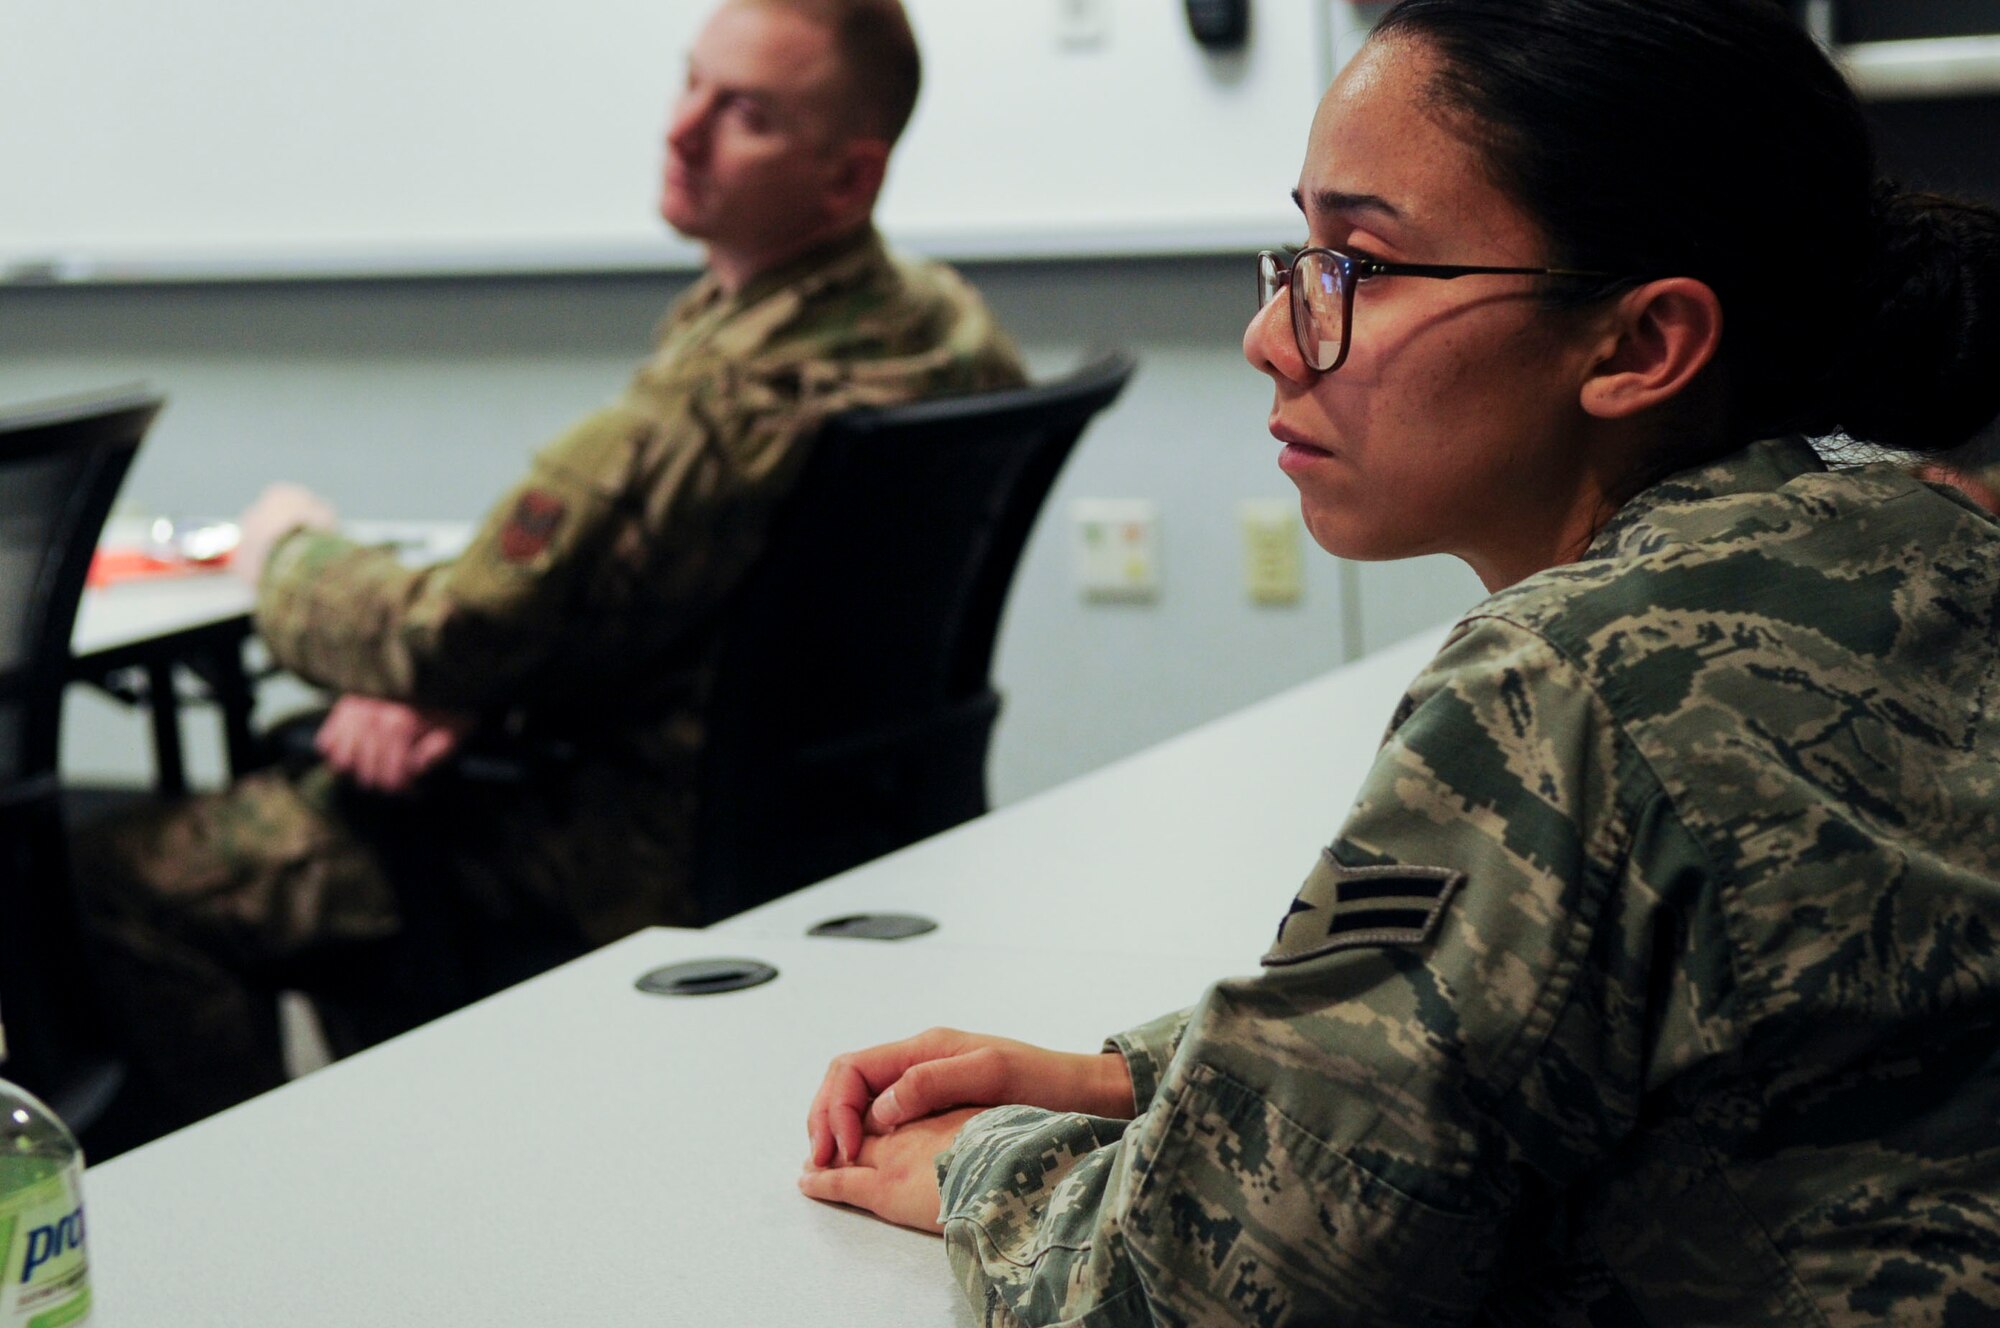 Airman 1st Class Mesa Jewels, Geospatial and Signatures Intelligence Squadron geospatial analyst, listens to a briefing during a First Sergeant’s Panel on the progressive discipline model at Wright-Patterson Air Force Base, Ohio, Dec. 11, 2019. Jewels stated that she attended the panel so she could gain firsthand knowledge on specific disciplinary structures frequently used. (U.S. Air Force photo by Staff Sgt. Seth Stang)